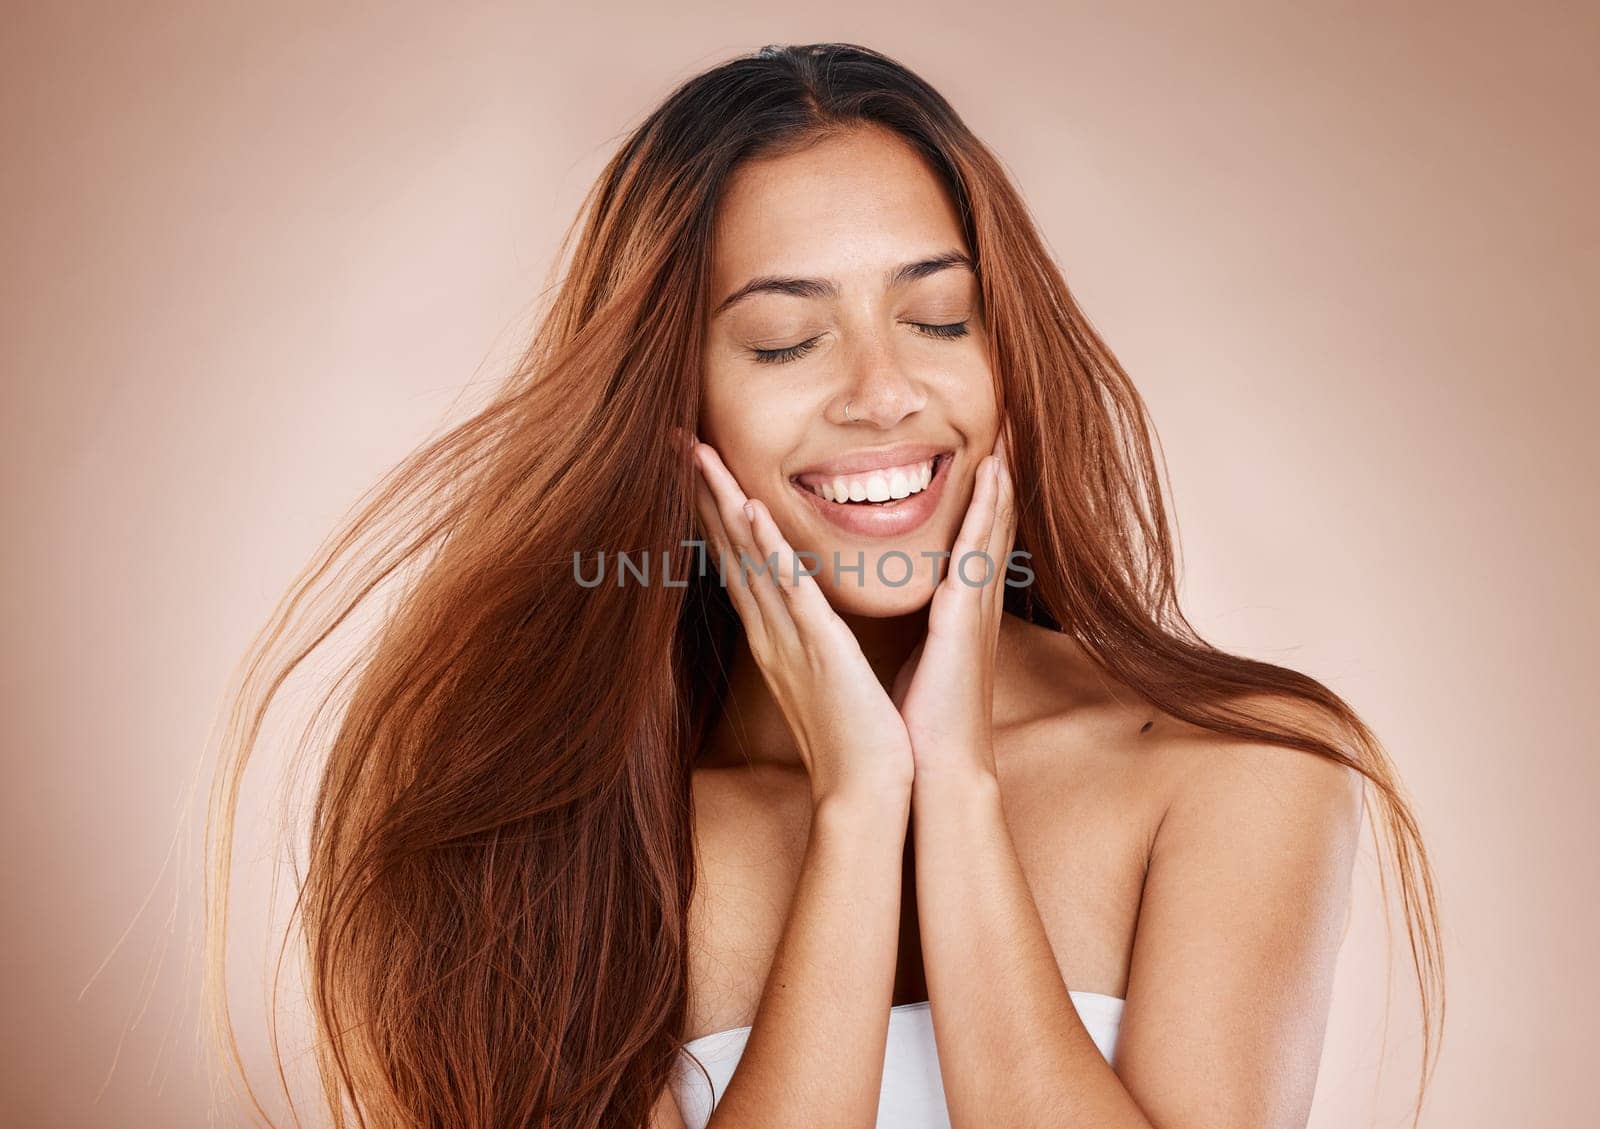 Beauty, hair care and face of woman with eyes closed in studio on brown background. Skincare, makeup cosmetics or female model satisfied with salon treatment for balayage hairstyle, growth or texture by YuriArcurs